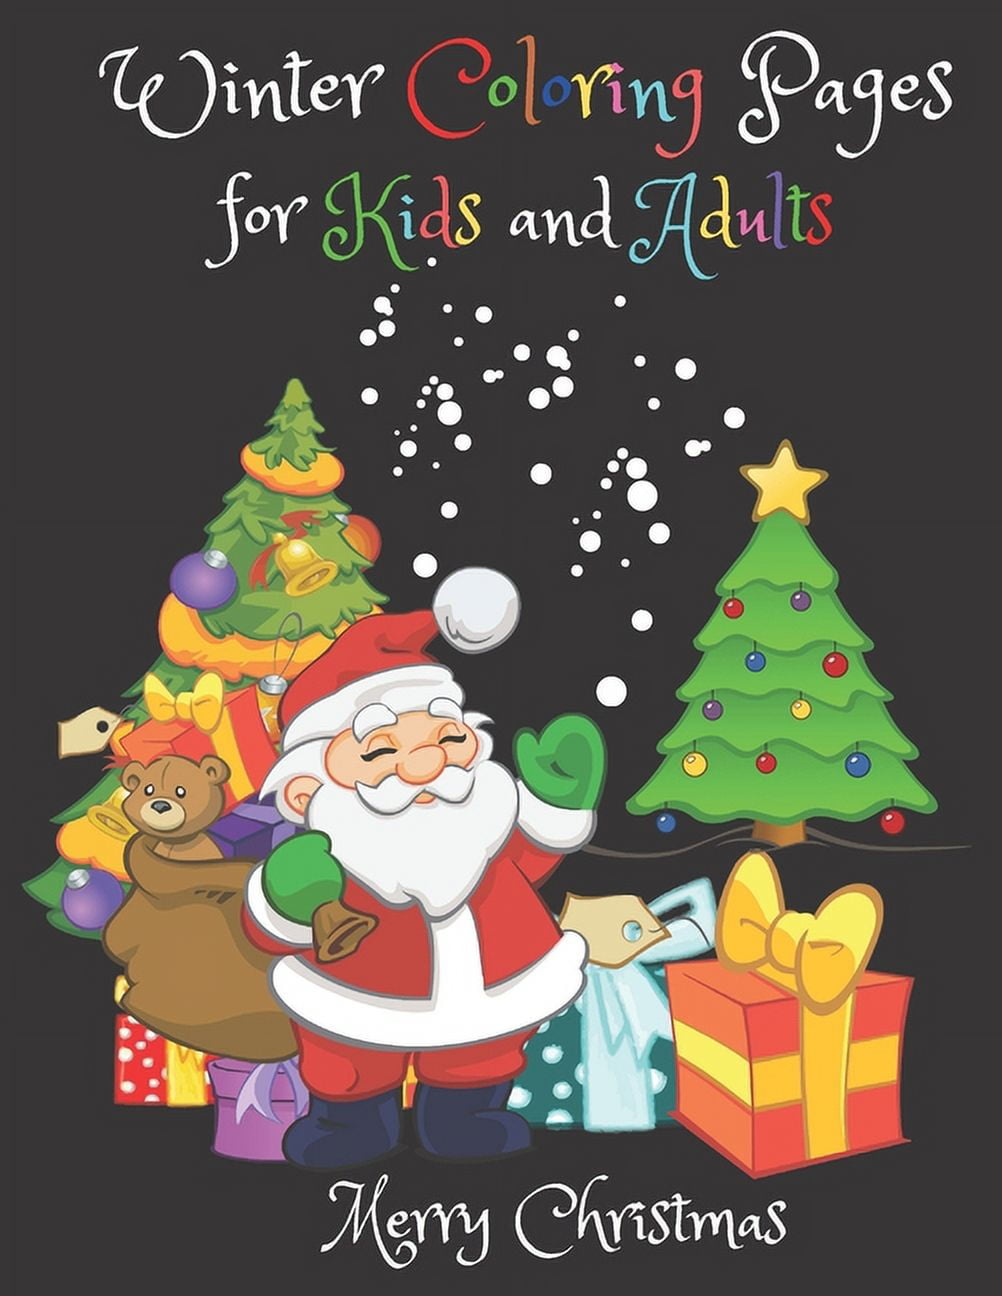 Barnes and Noble Winter Coloring Book For Adults and Seniors: Holiday  Coloring Book For Adults and Seniors